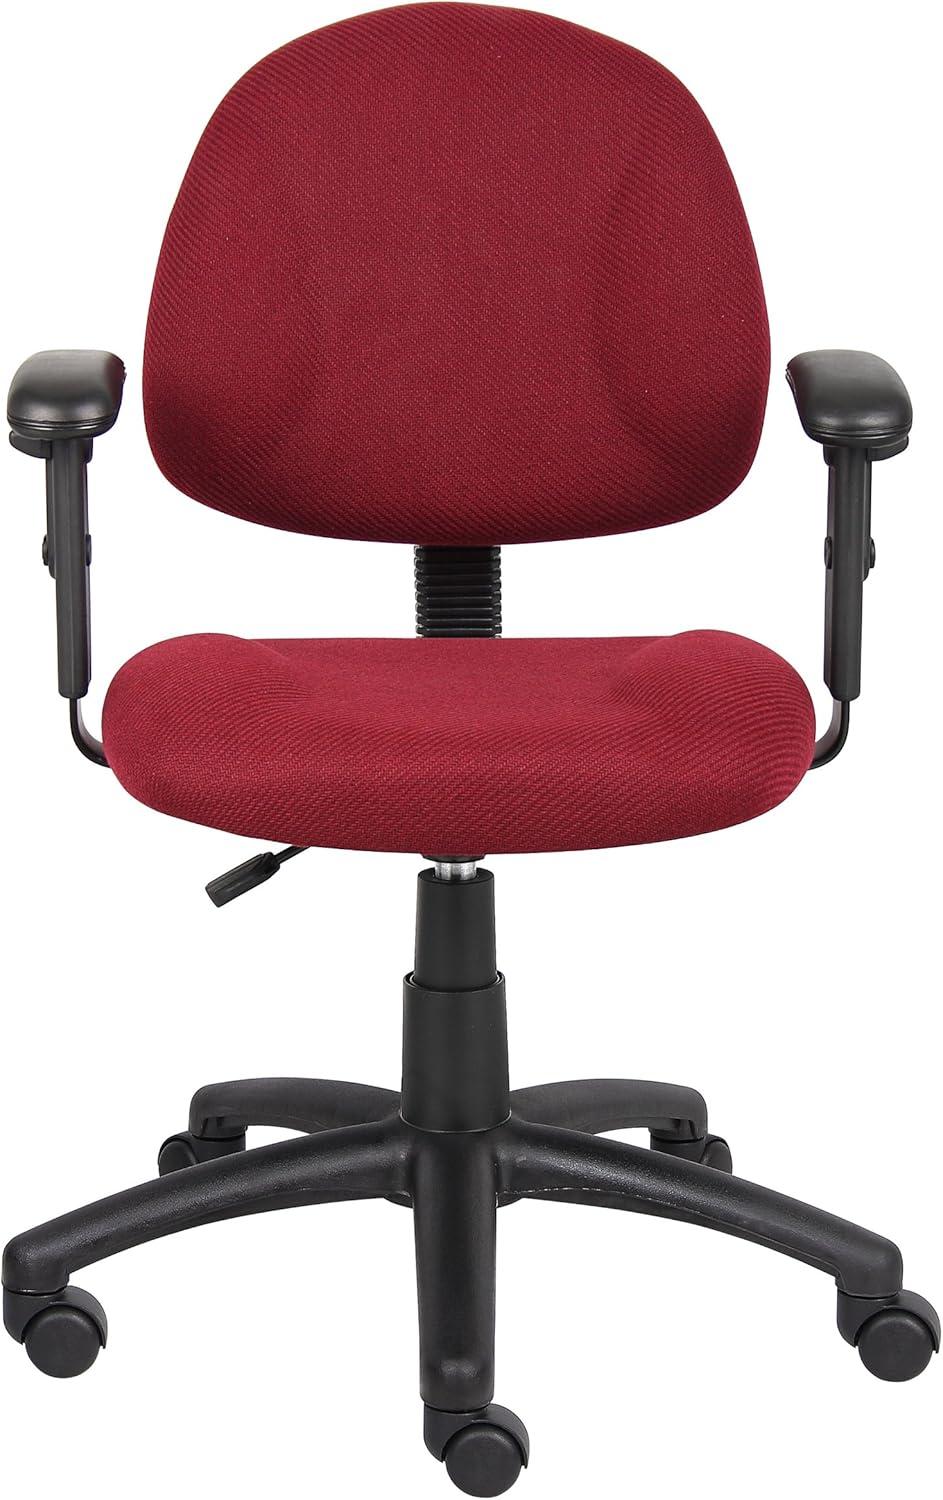 Ergonomic Executive Swivel Chair in Rich Burgundy with Adjustable Arms